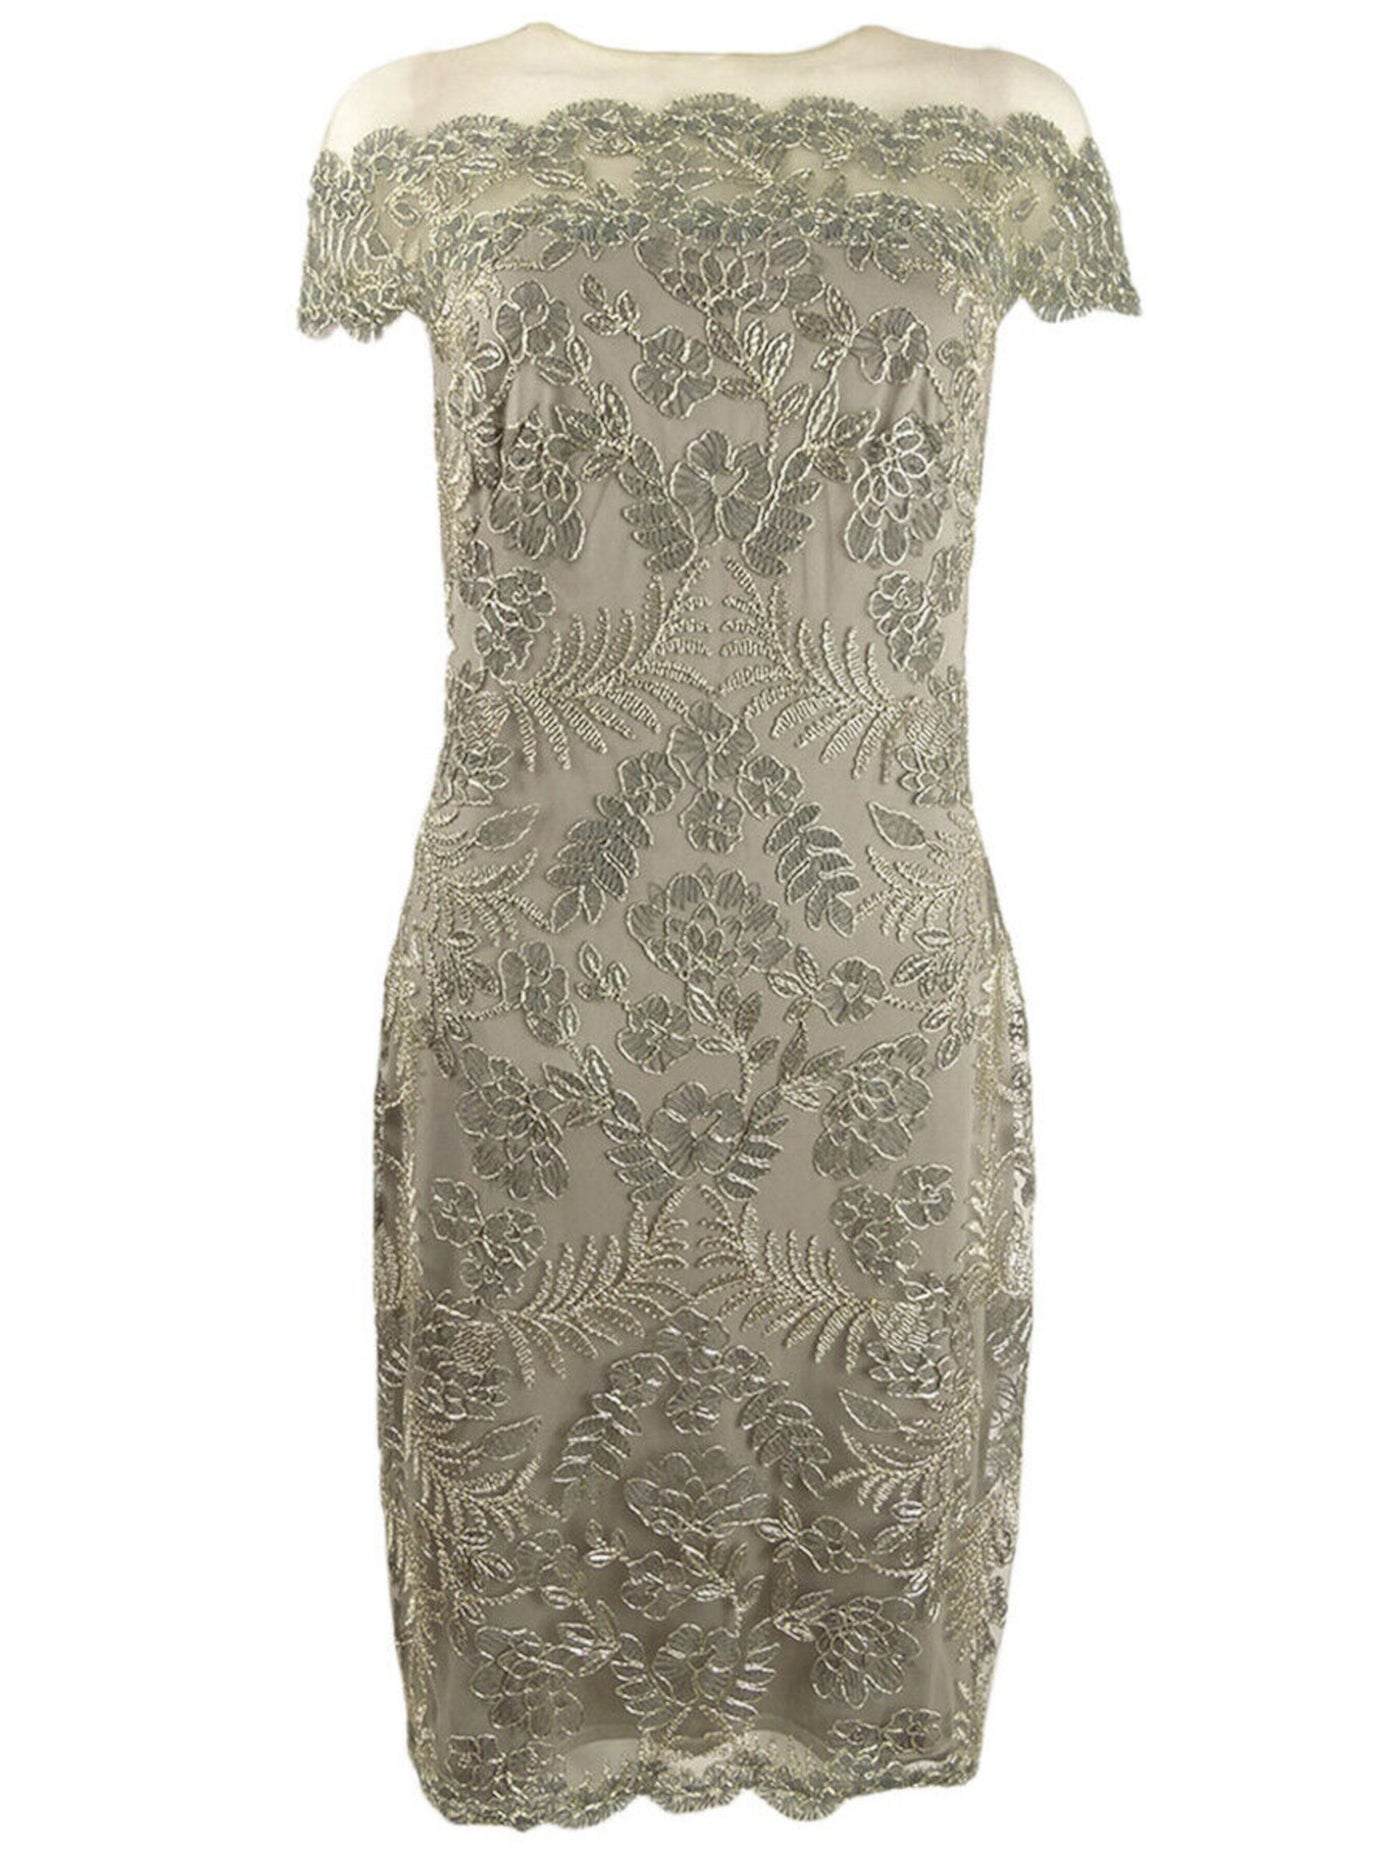 TADASHI SHOJI Womens Beige Embroidered Lace Off the Shoulder Above The Knee Cocktail Body Con Dress 6